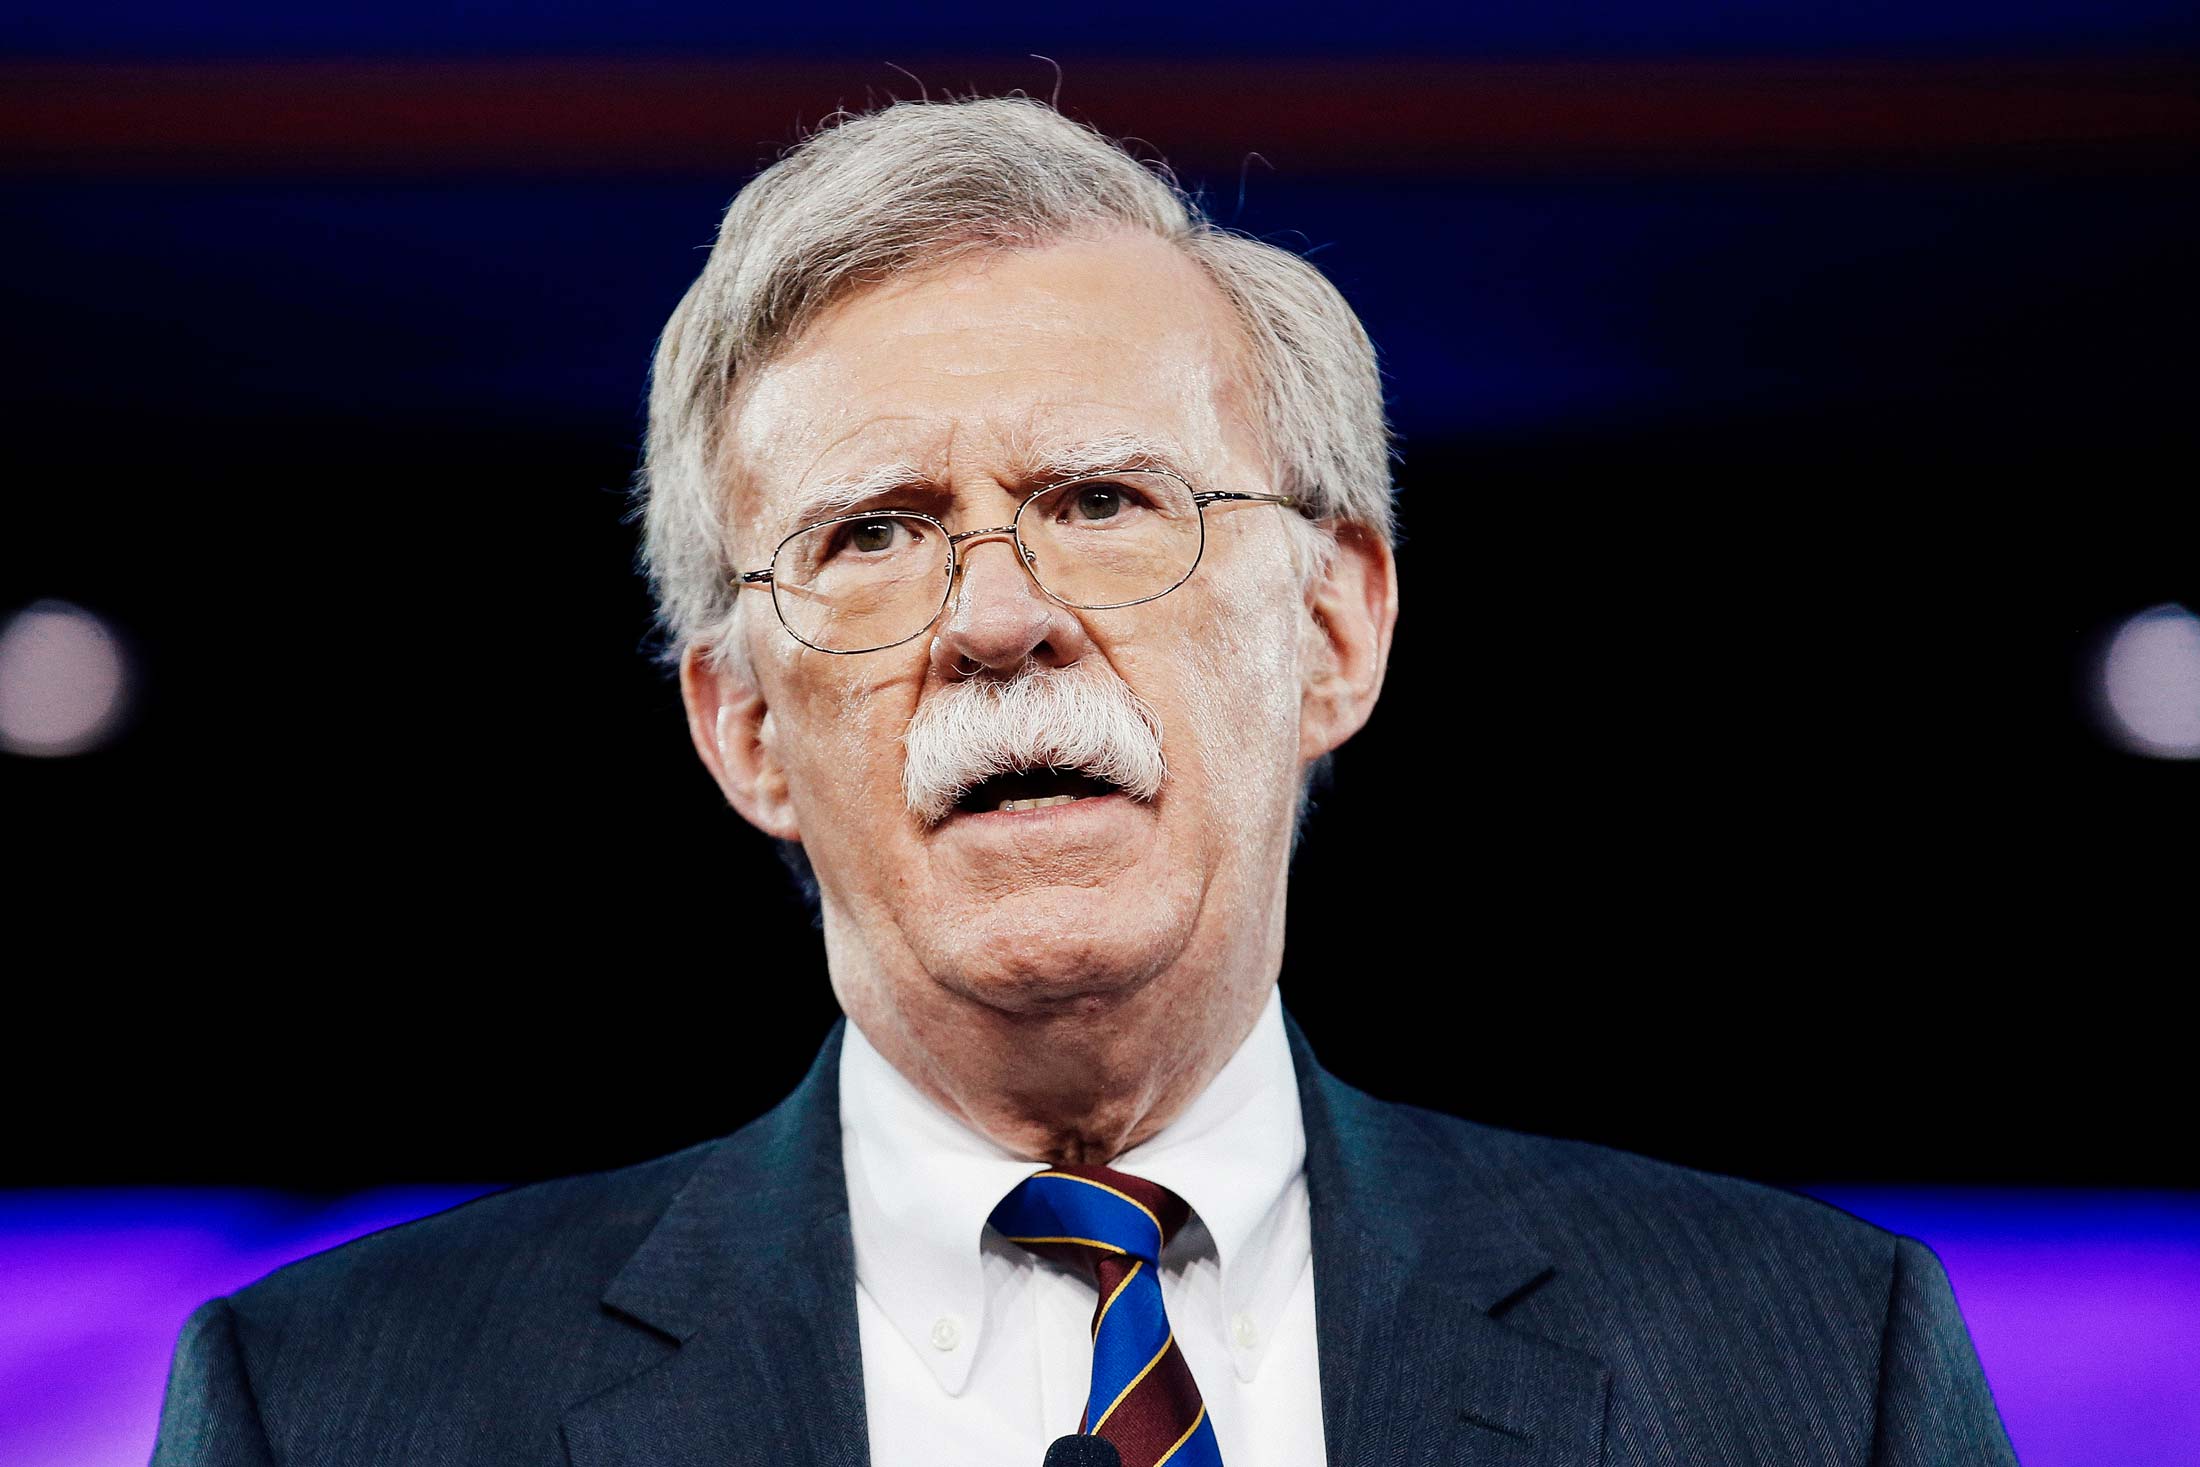 John Bolton speaks at the Conservative Political Action Conference in Oxon Hill, Maryland, on Feb. 24, 2017. 